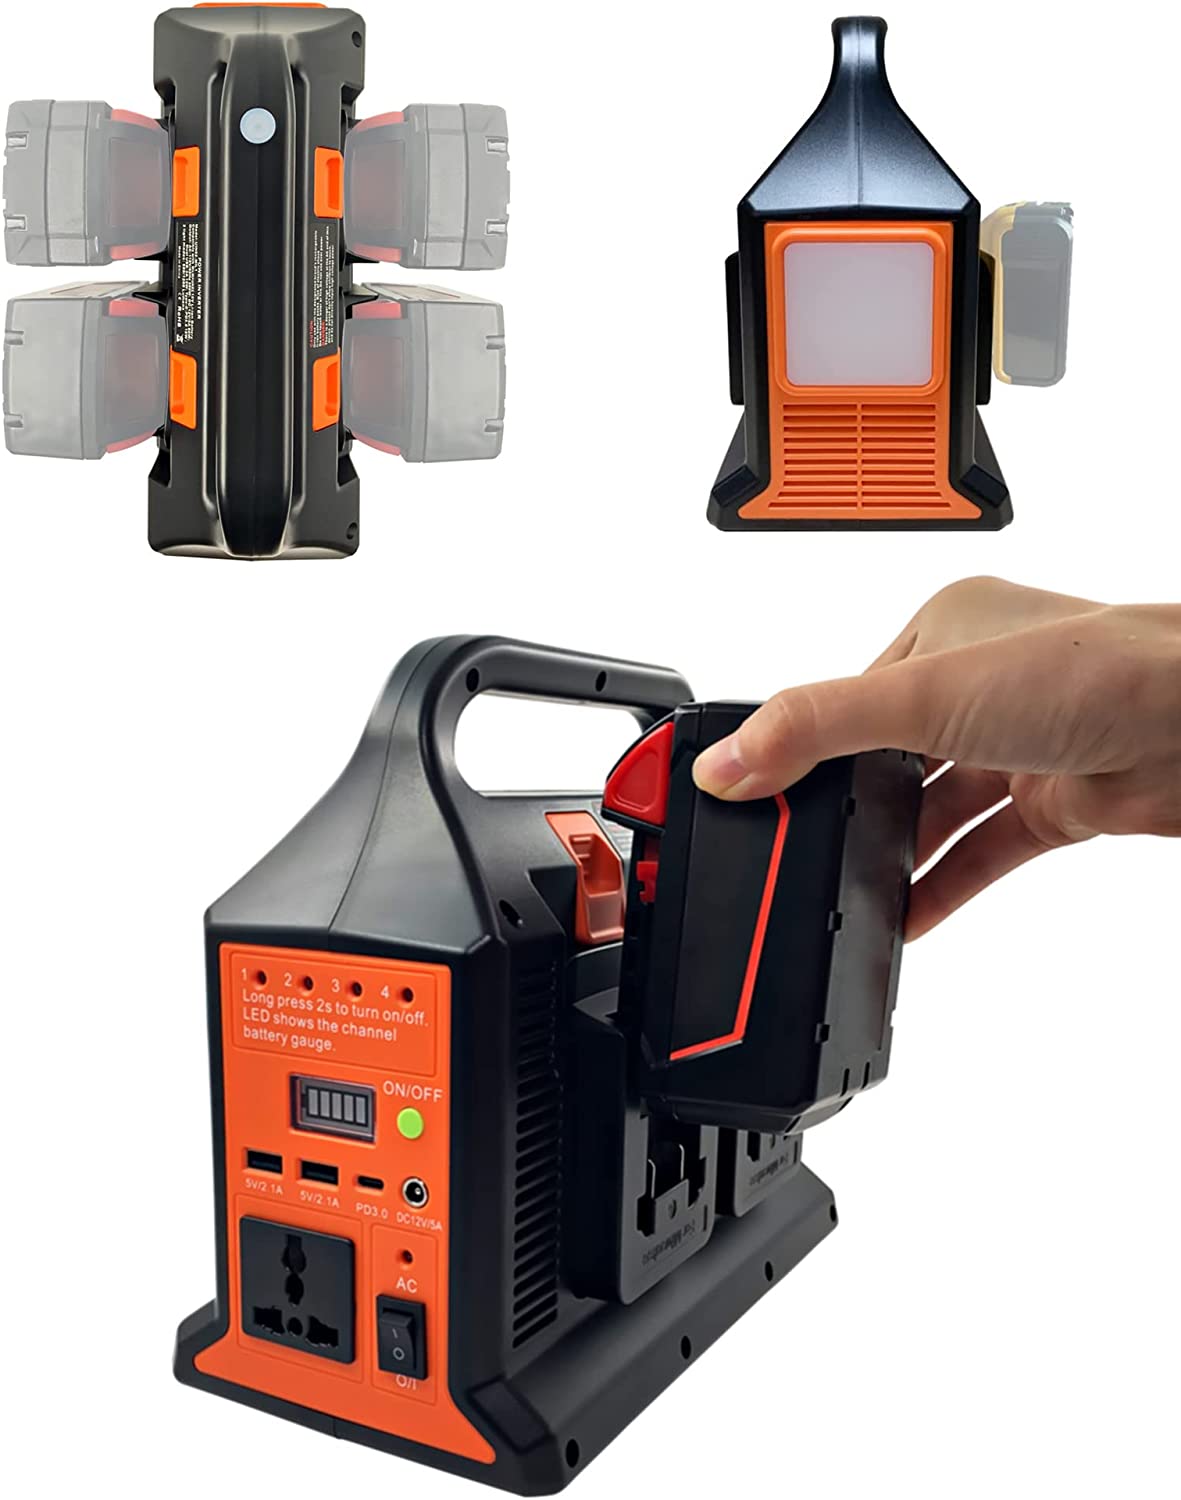 300W 4 channel Portable Power Supply Inverter for Outdoor camping emergency lighting and charging